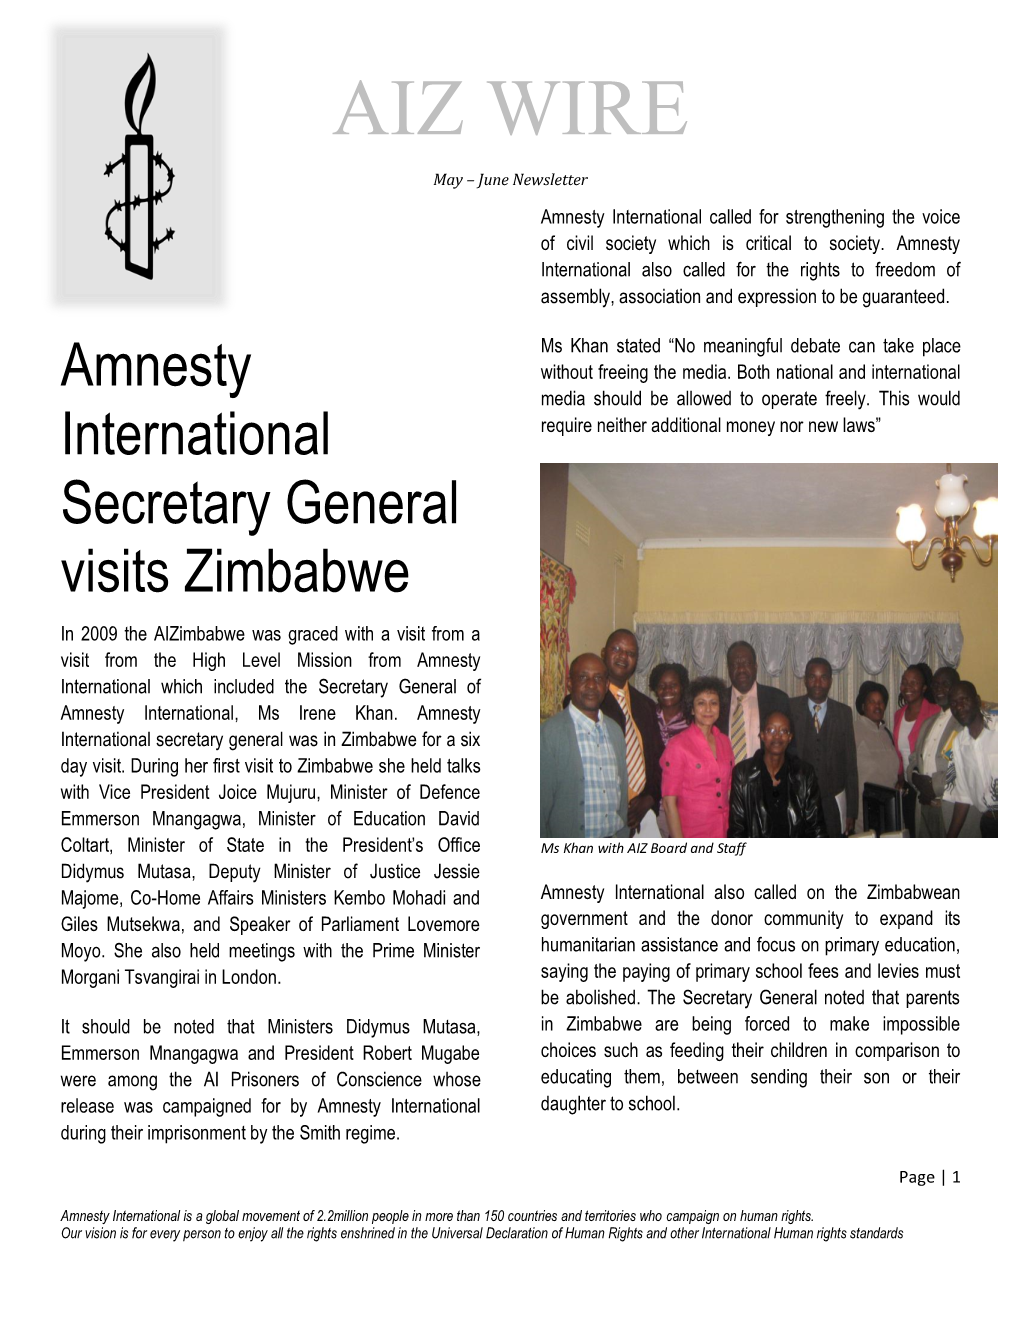 AIZ WIRE May – June Newsletter Amnesty International Called for Strengthening the Voice of Civil Society Which Is Critical to Society